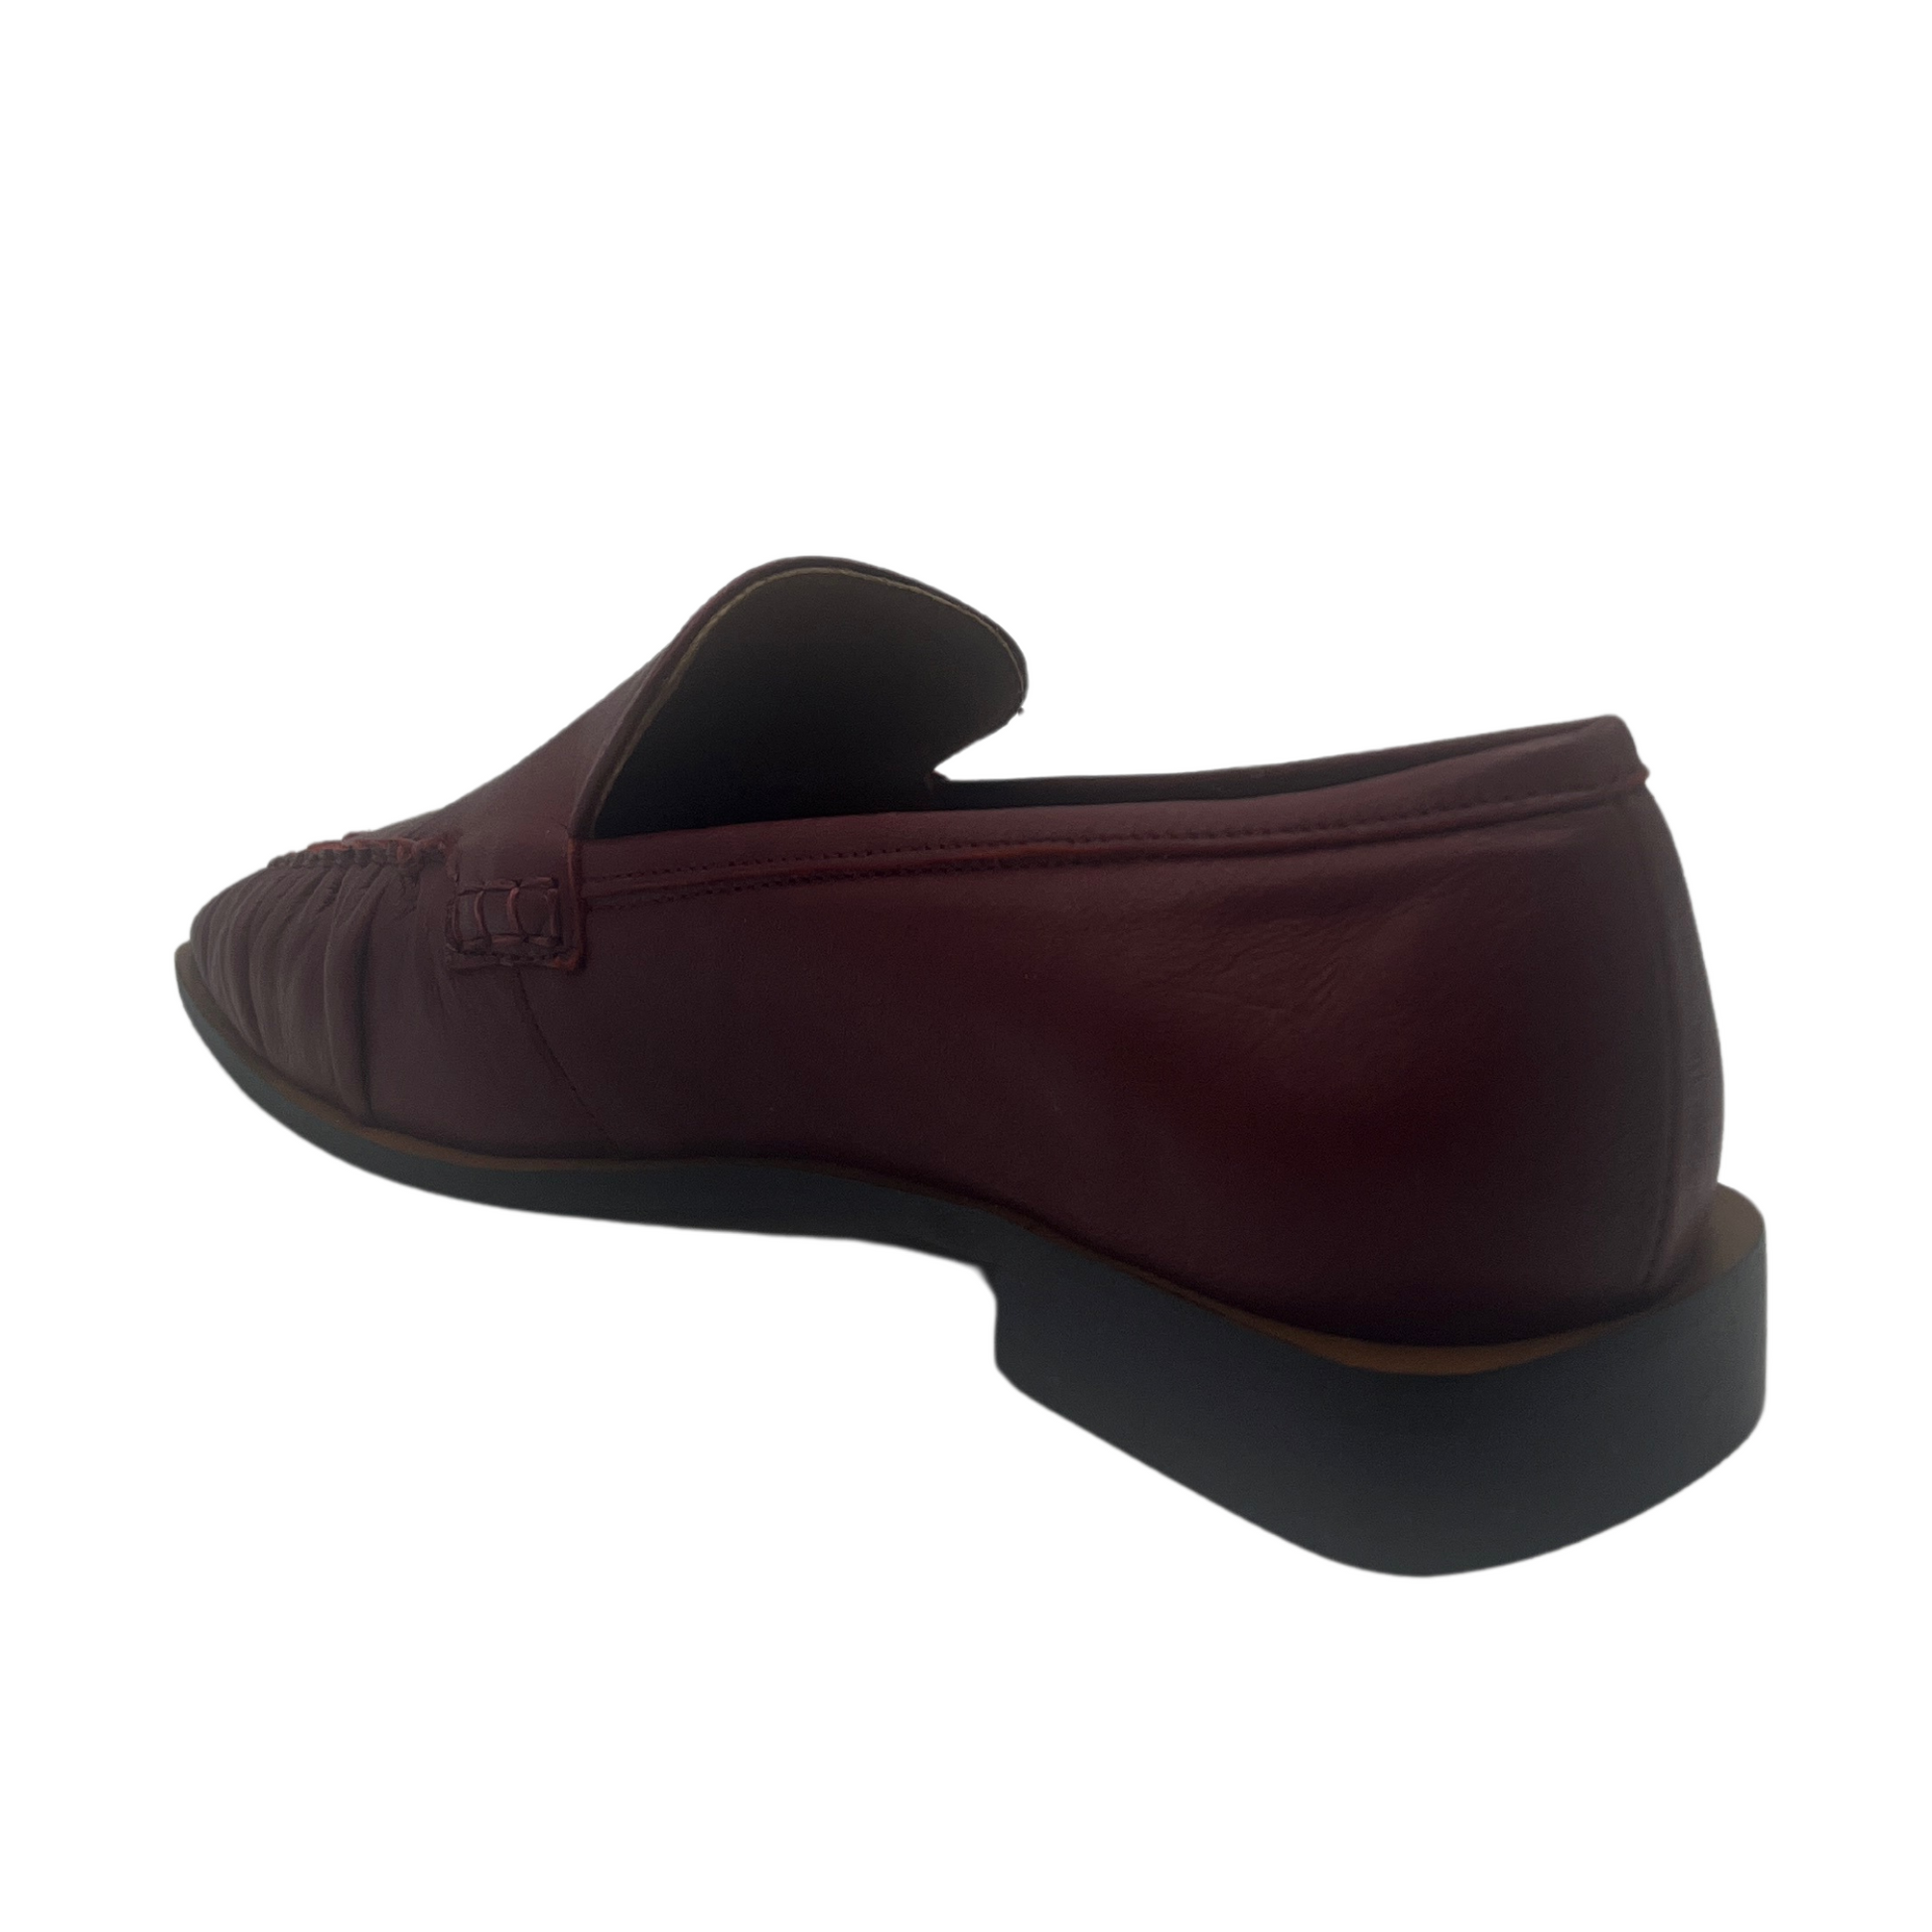 Back view of ruby red leather loafer with square toe and block heel